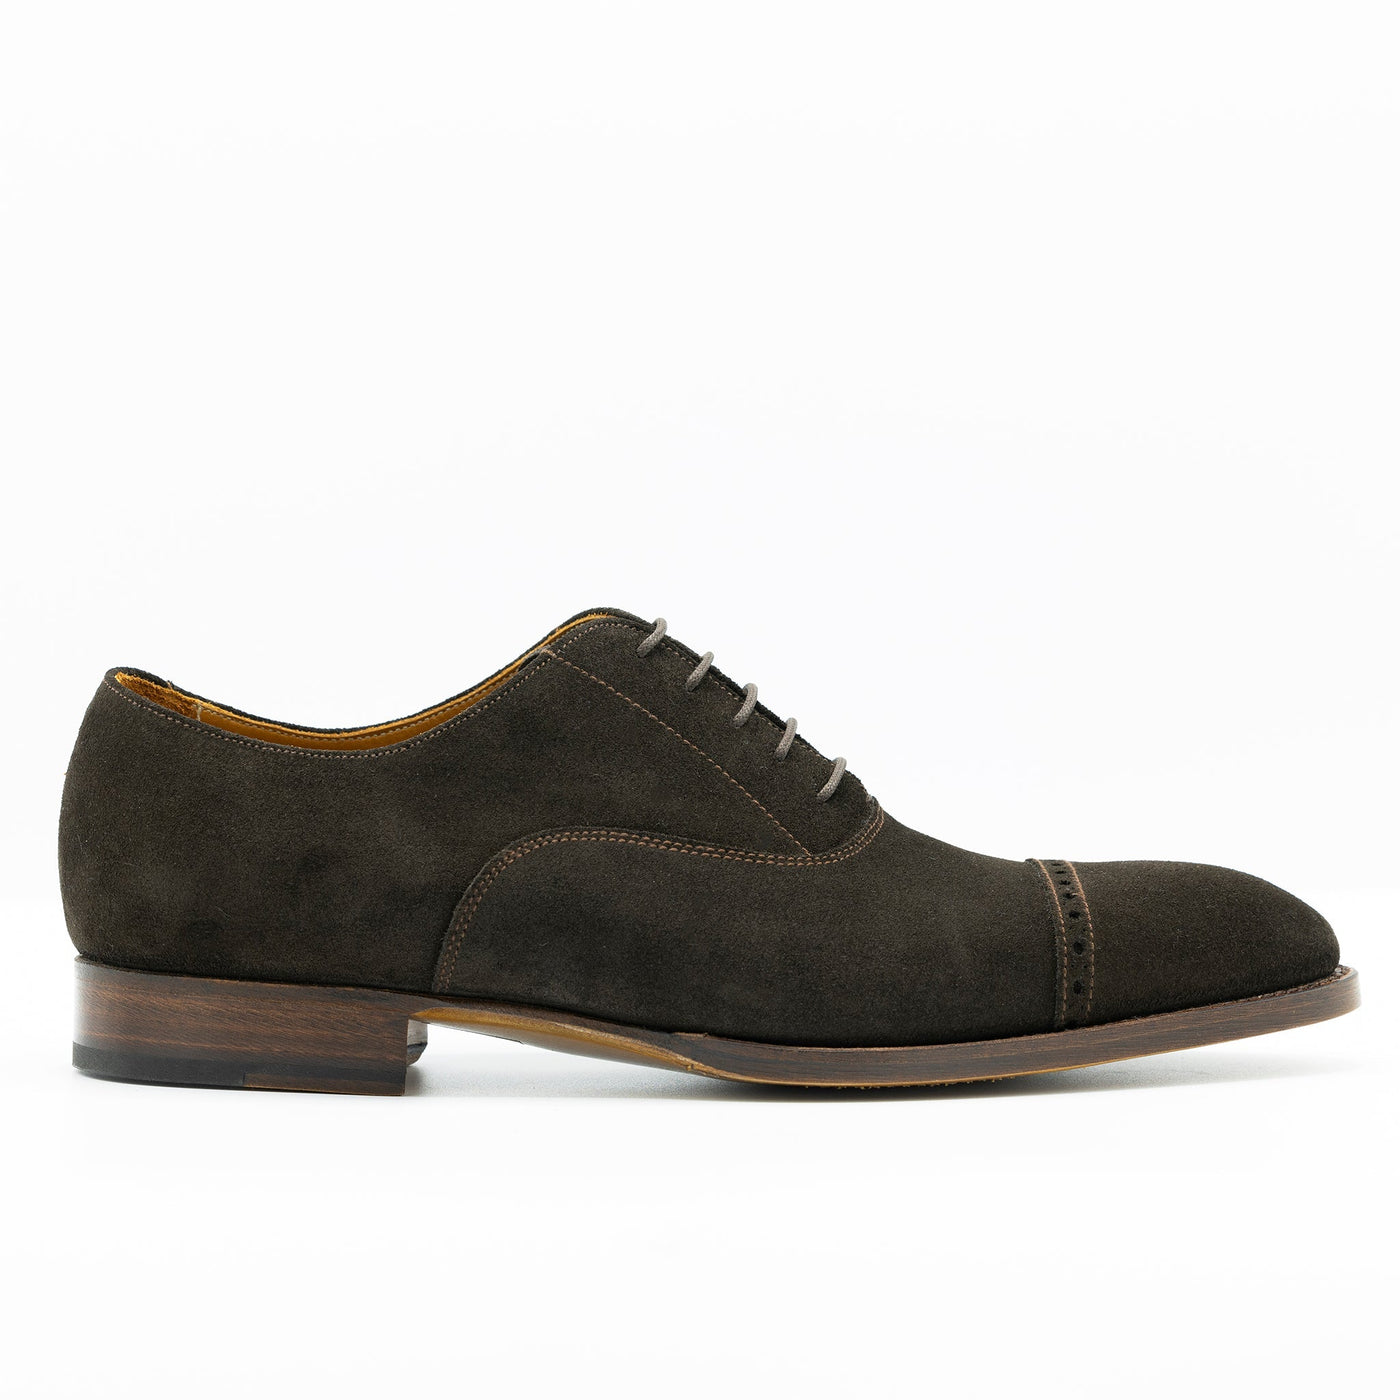 Brown Suede oxford shoes with edgestiched leather soles and waxed shoe laces.Brown Suede oxford shoes with edgestiched leather soles and waxed shoe laces.